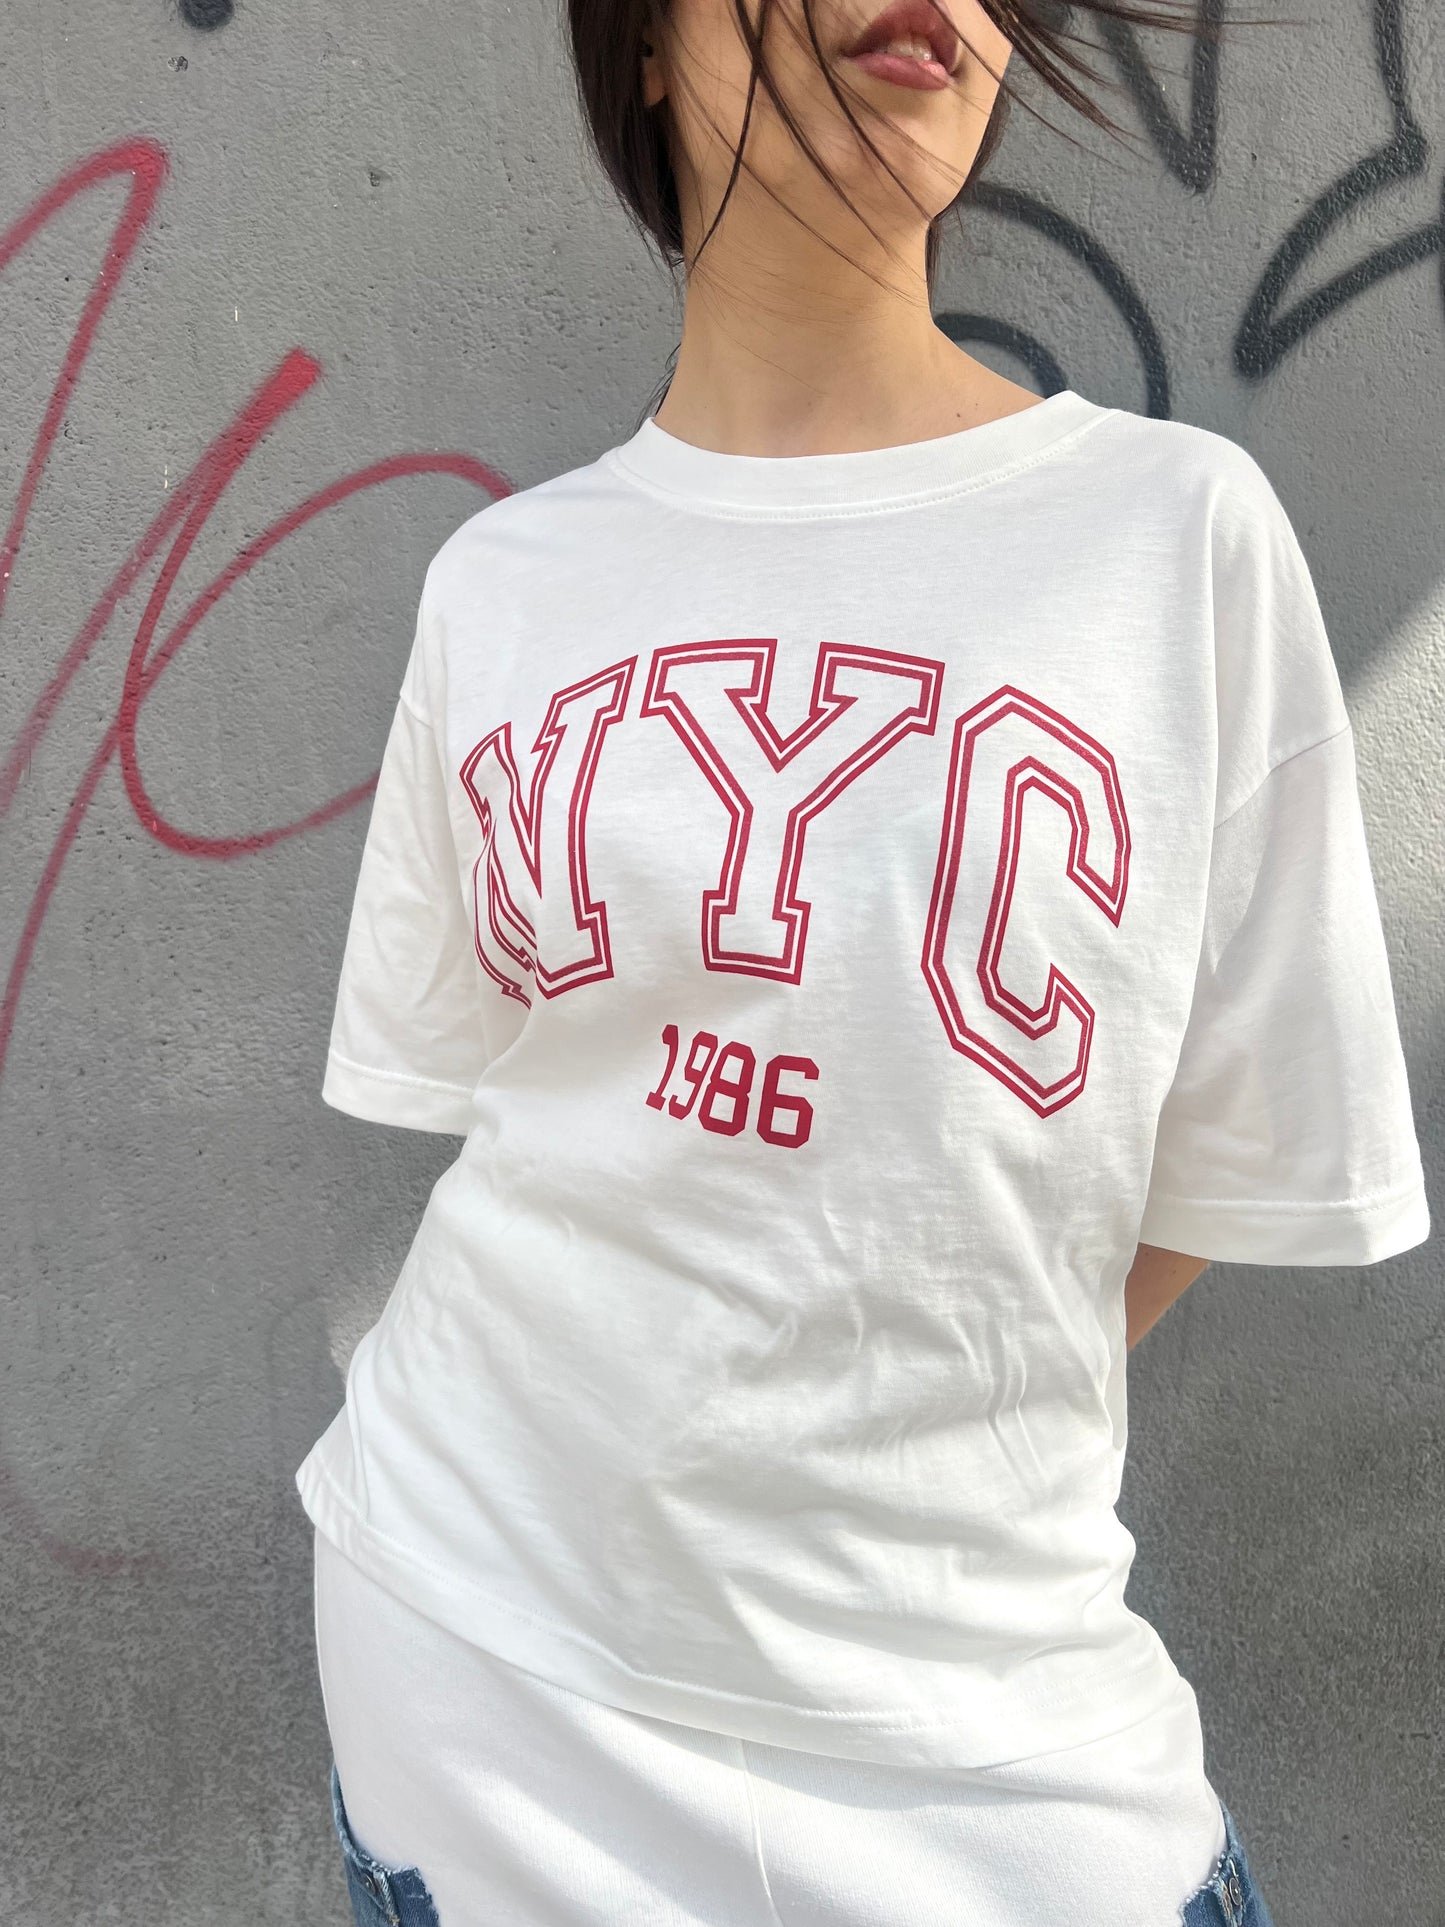 SUSY MIX T-SHIRT OVER NYC 1886 PANNA